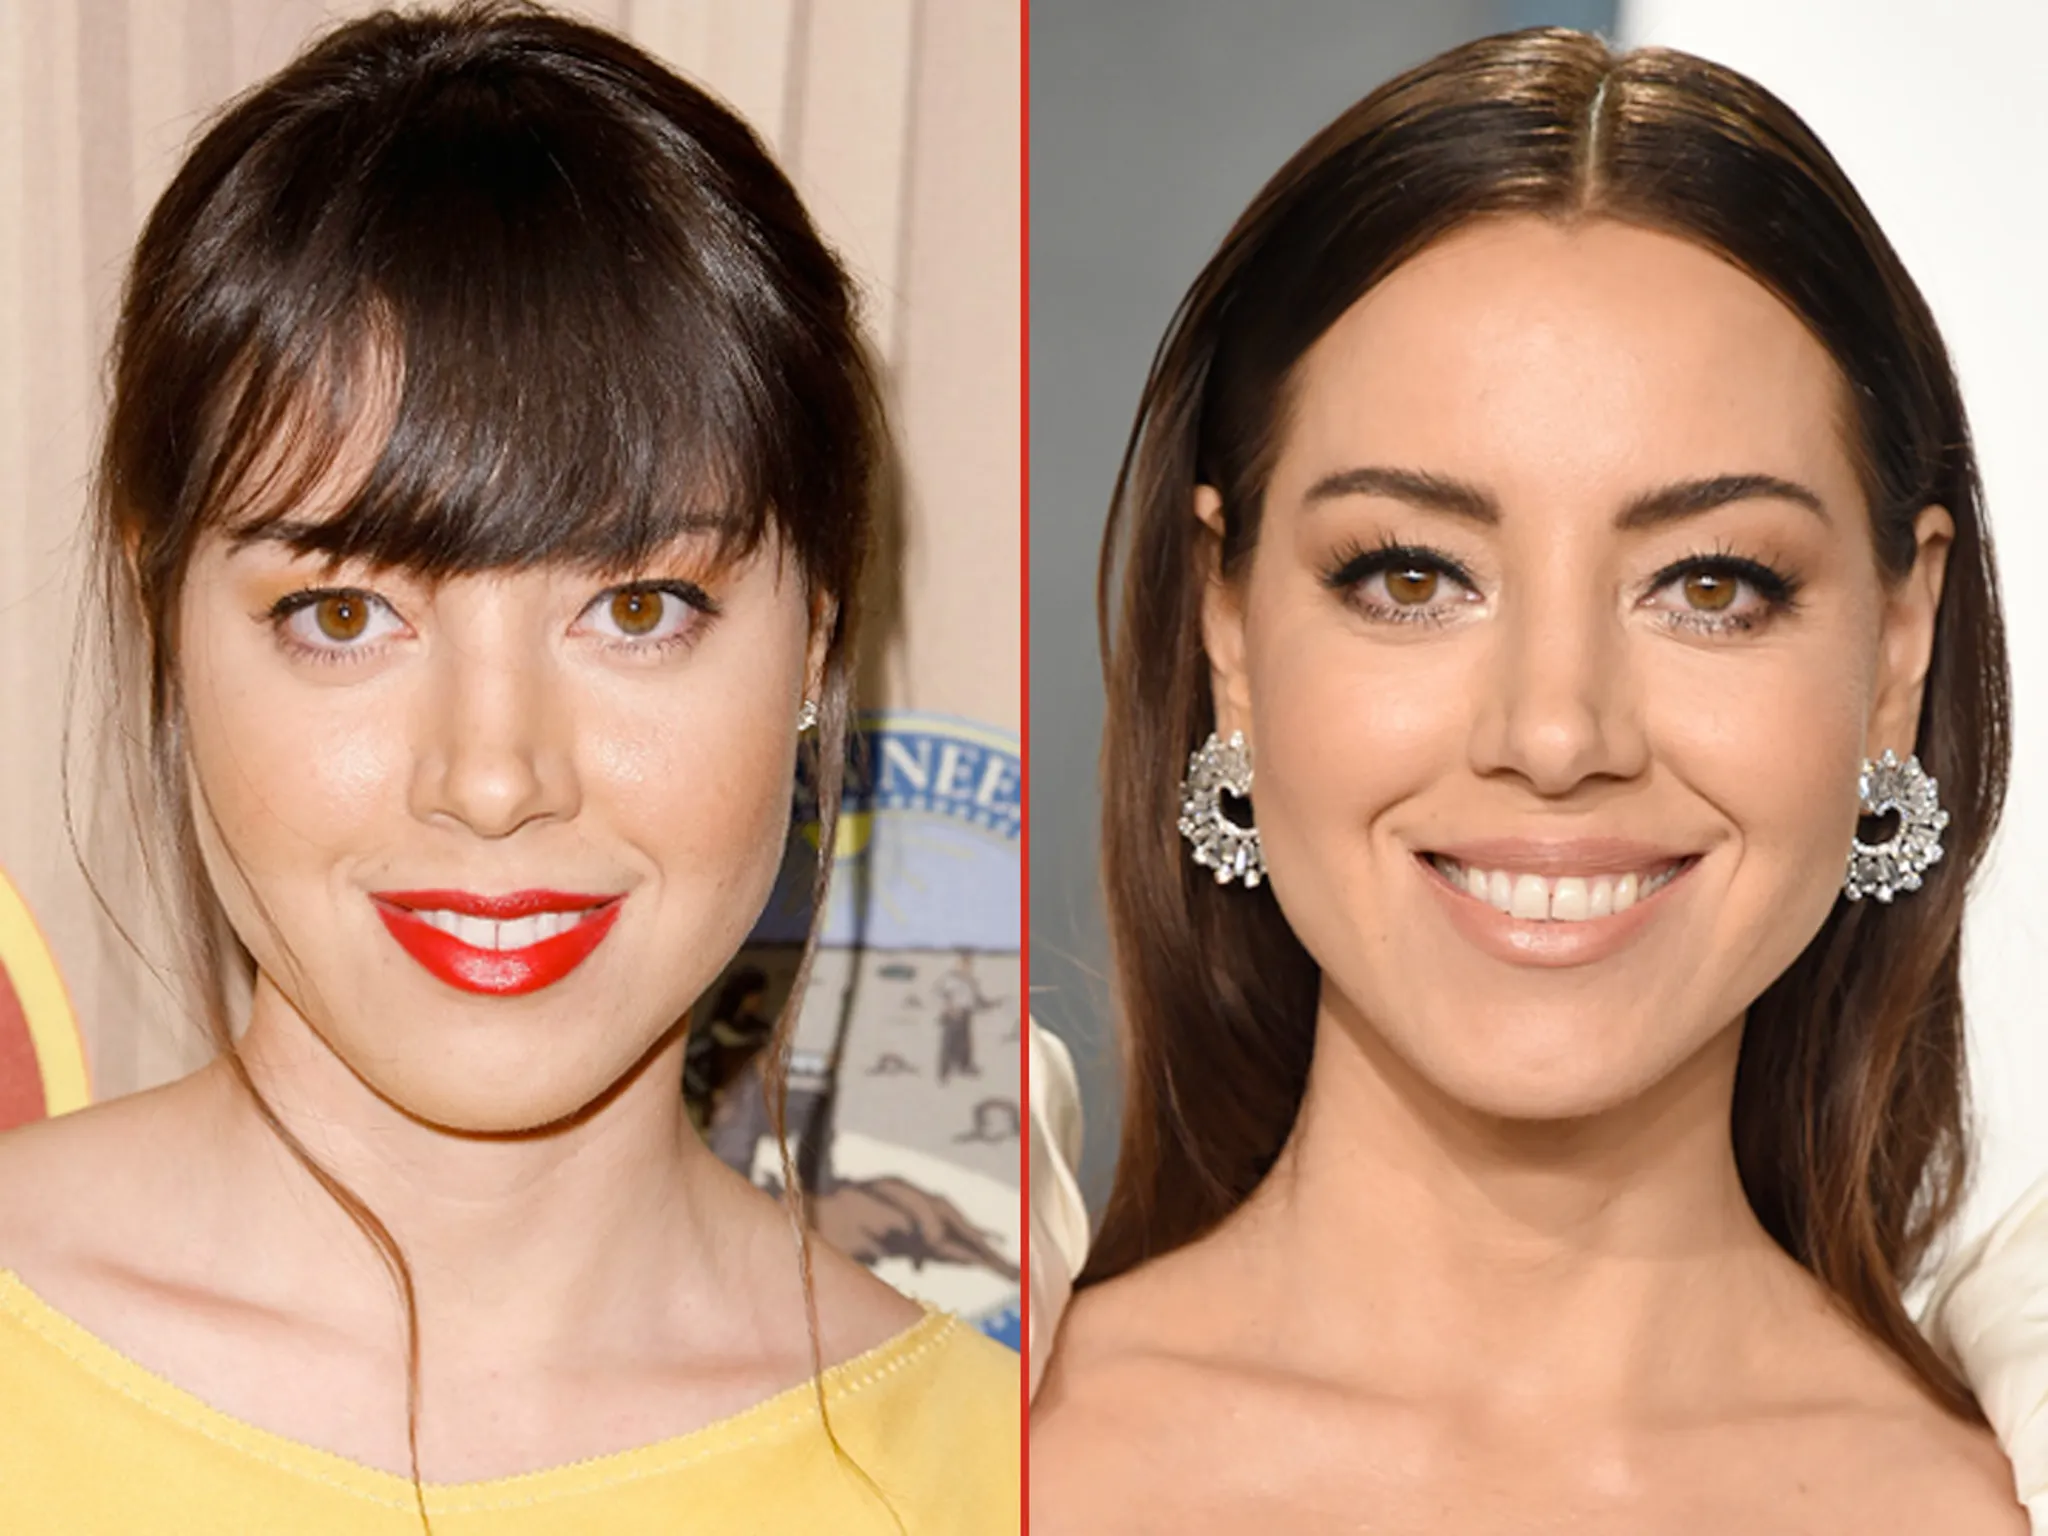 Who Is Aubrey Plaza? Did She Get Plastic Surgery? - The RC Online